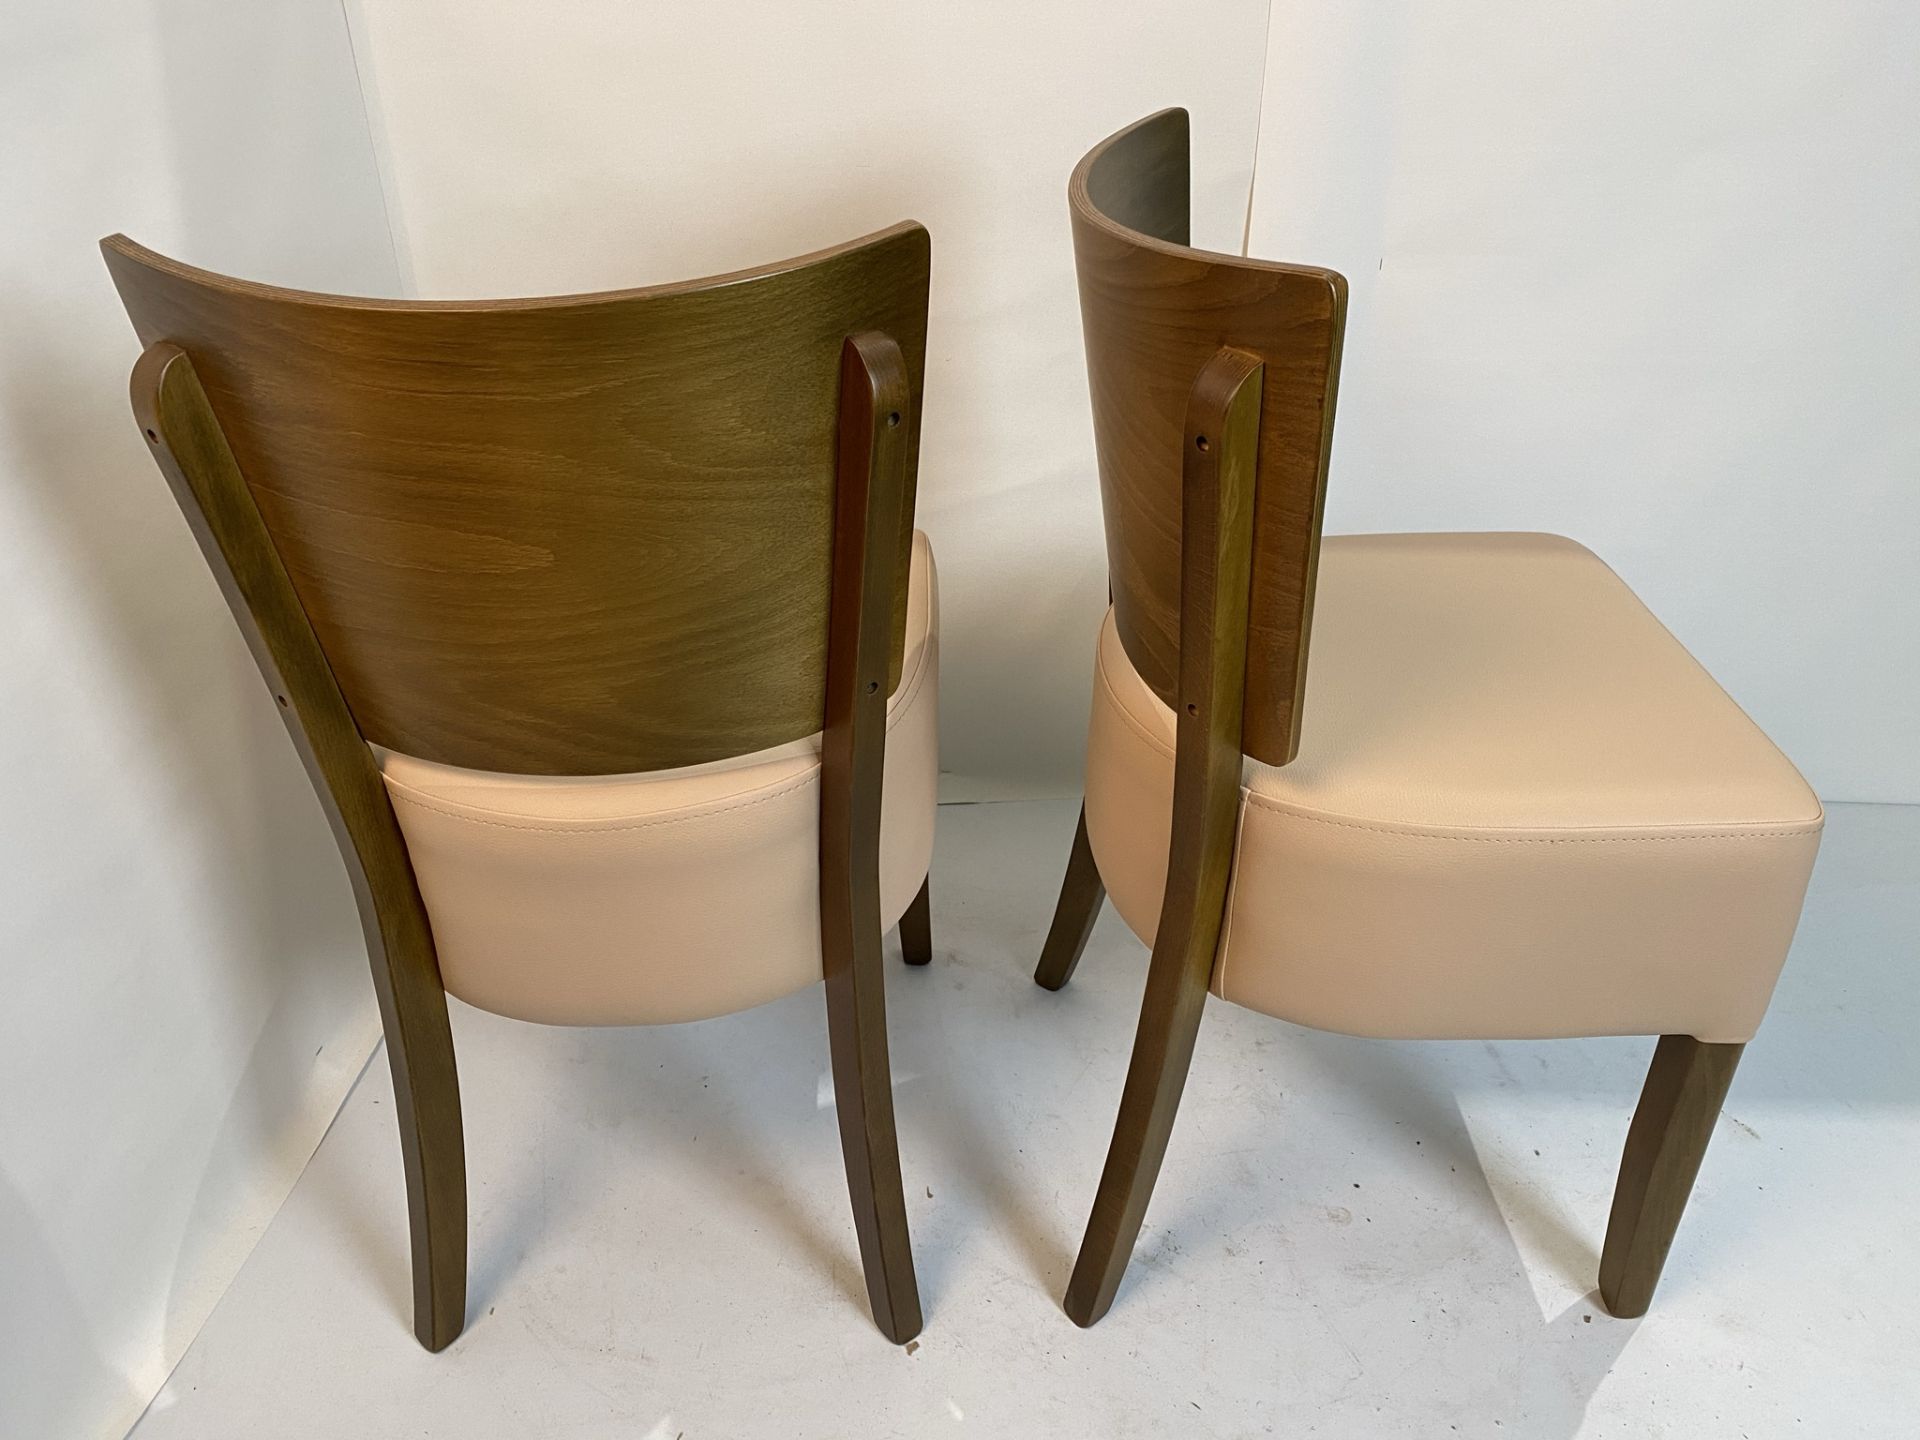 2 x Rebecca Vena BE-10 dining/side chairs with B. - Image 3 of 6